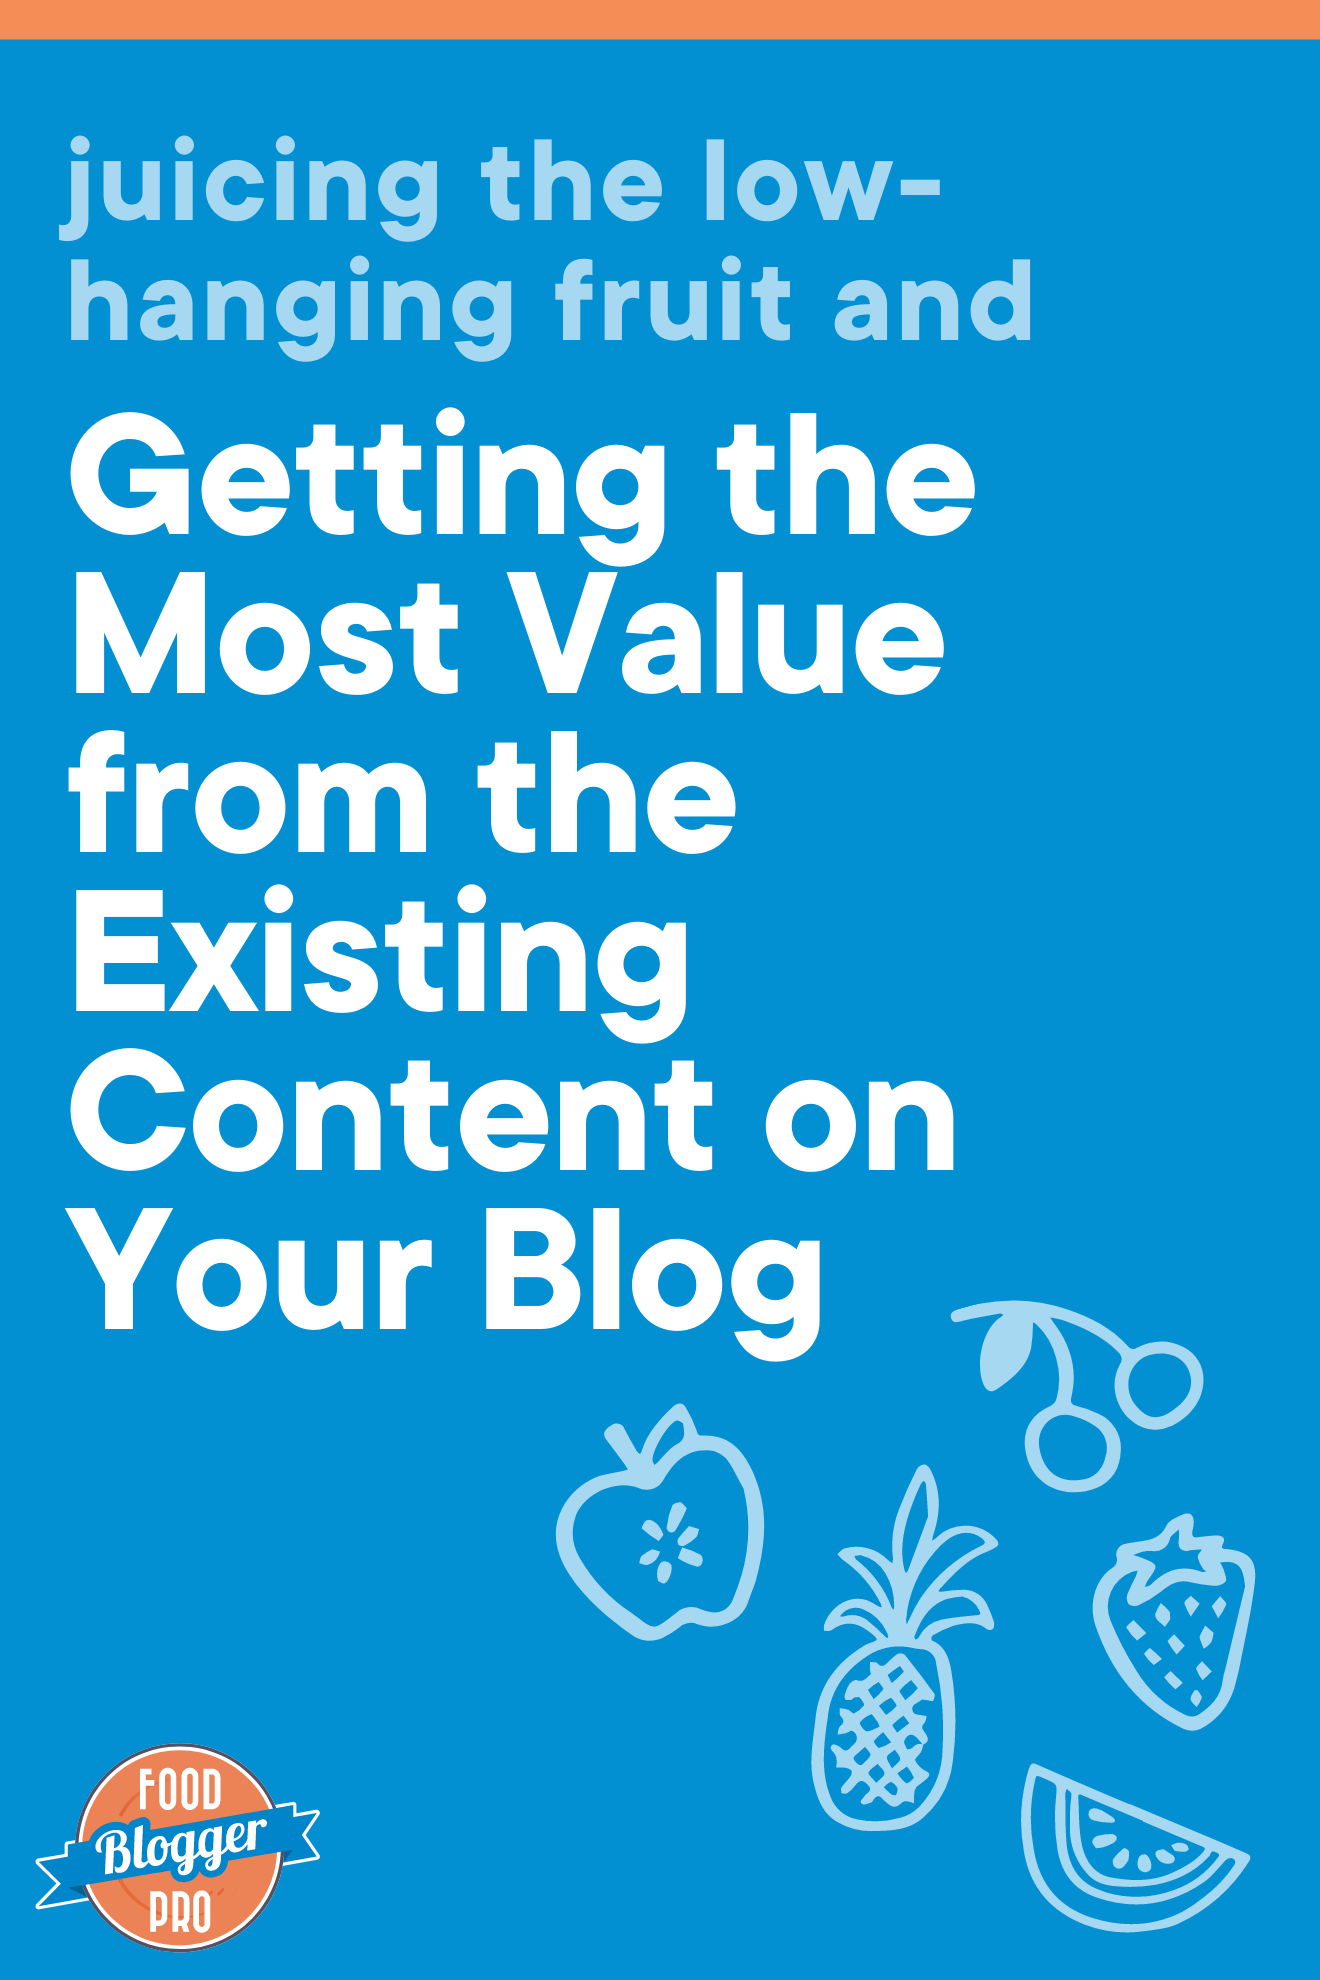 The title of this article, 'Juicing the Low-Hanging Fruit and Getting the Most Value from the Existing Content on Your Blog' on a blue background with fruit icons and the Food Blogger Pro logo